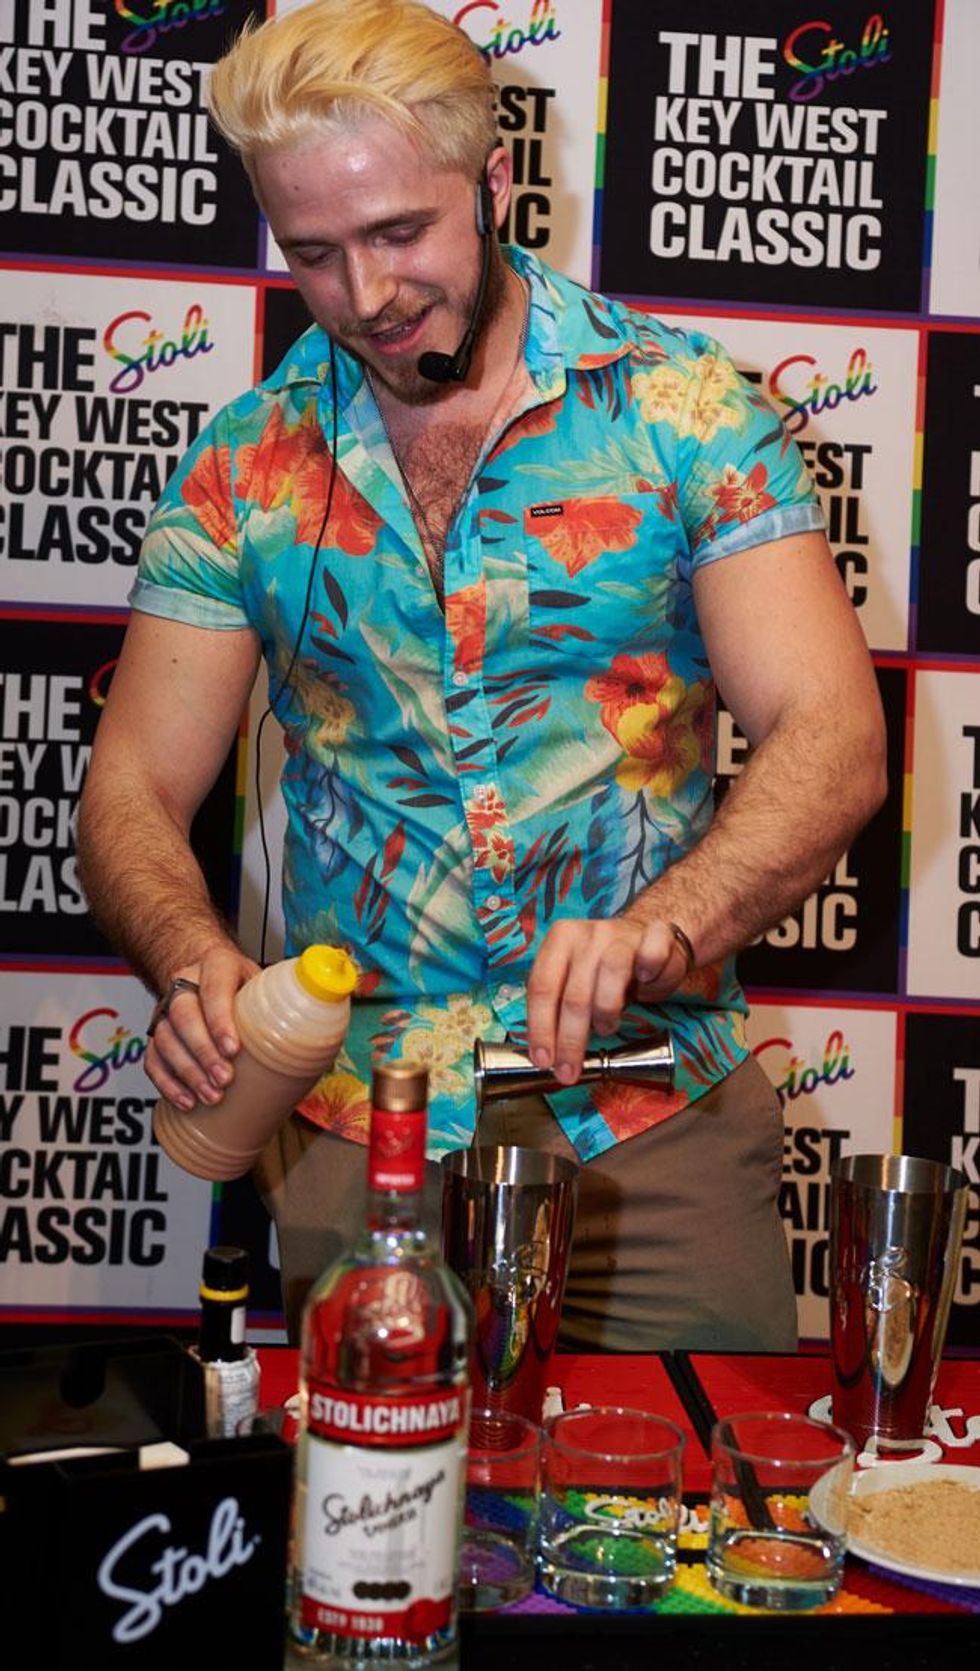 The 2017 Stoli Key West Cocktail Classic Toronto Event